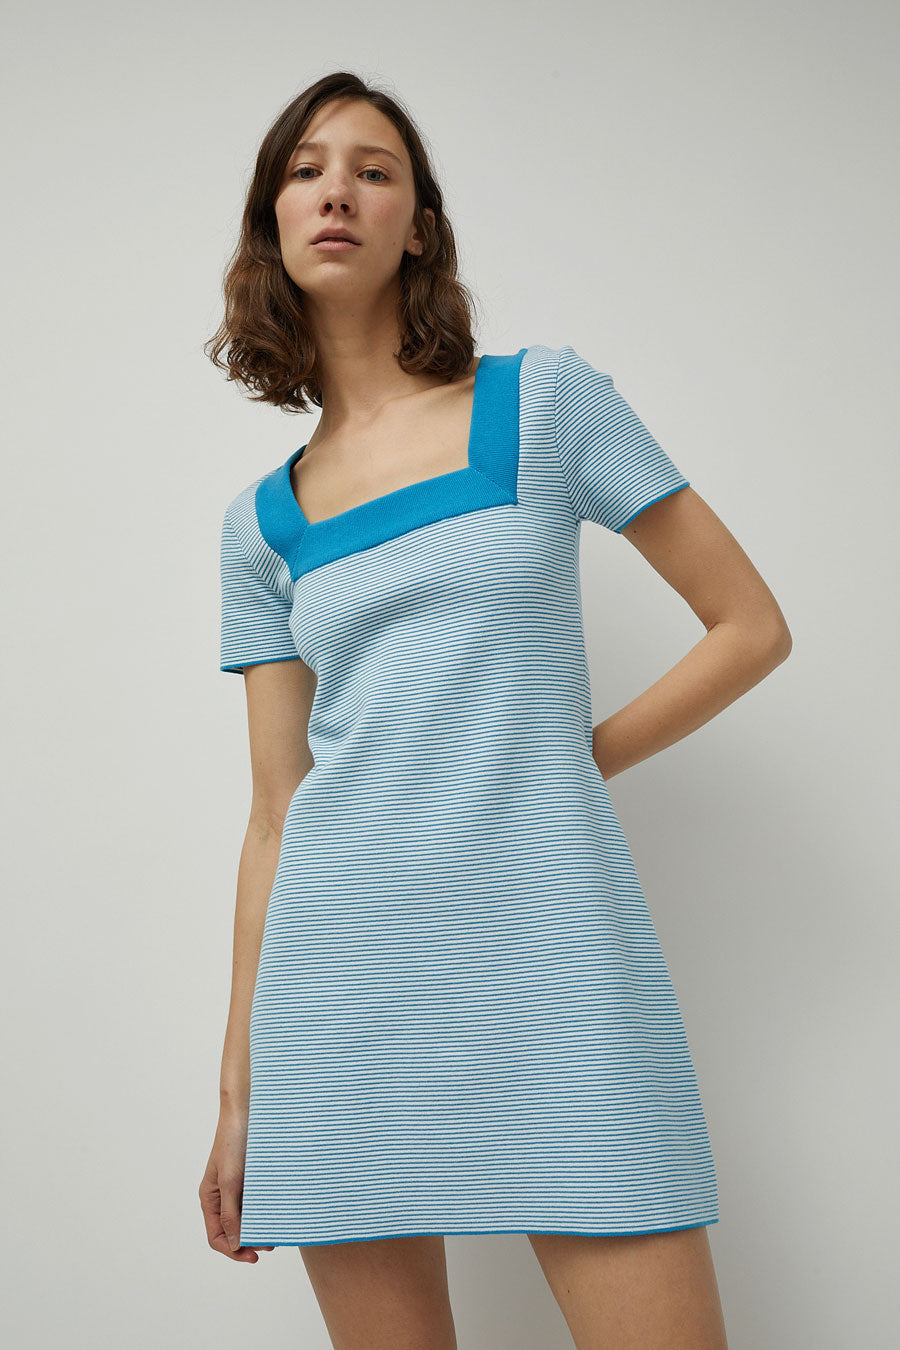 Ciao Lucia Sigrid Dress in Sail